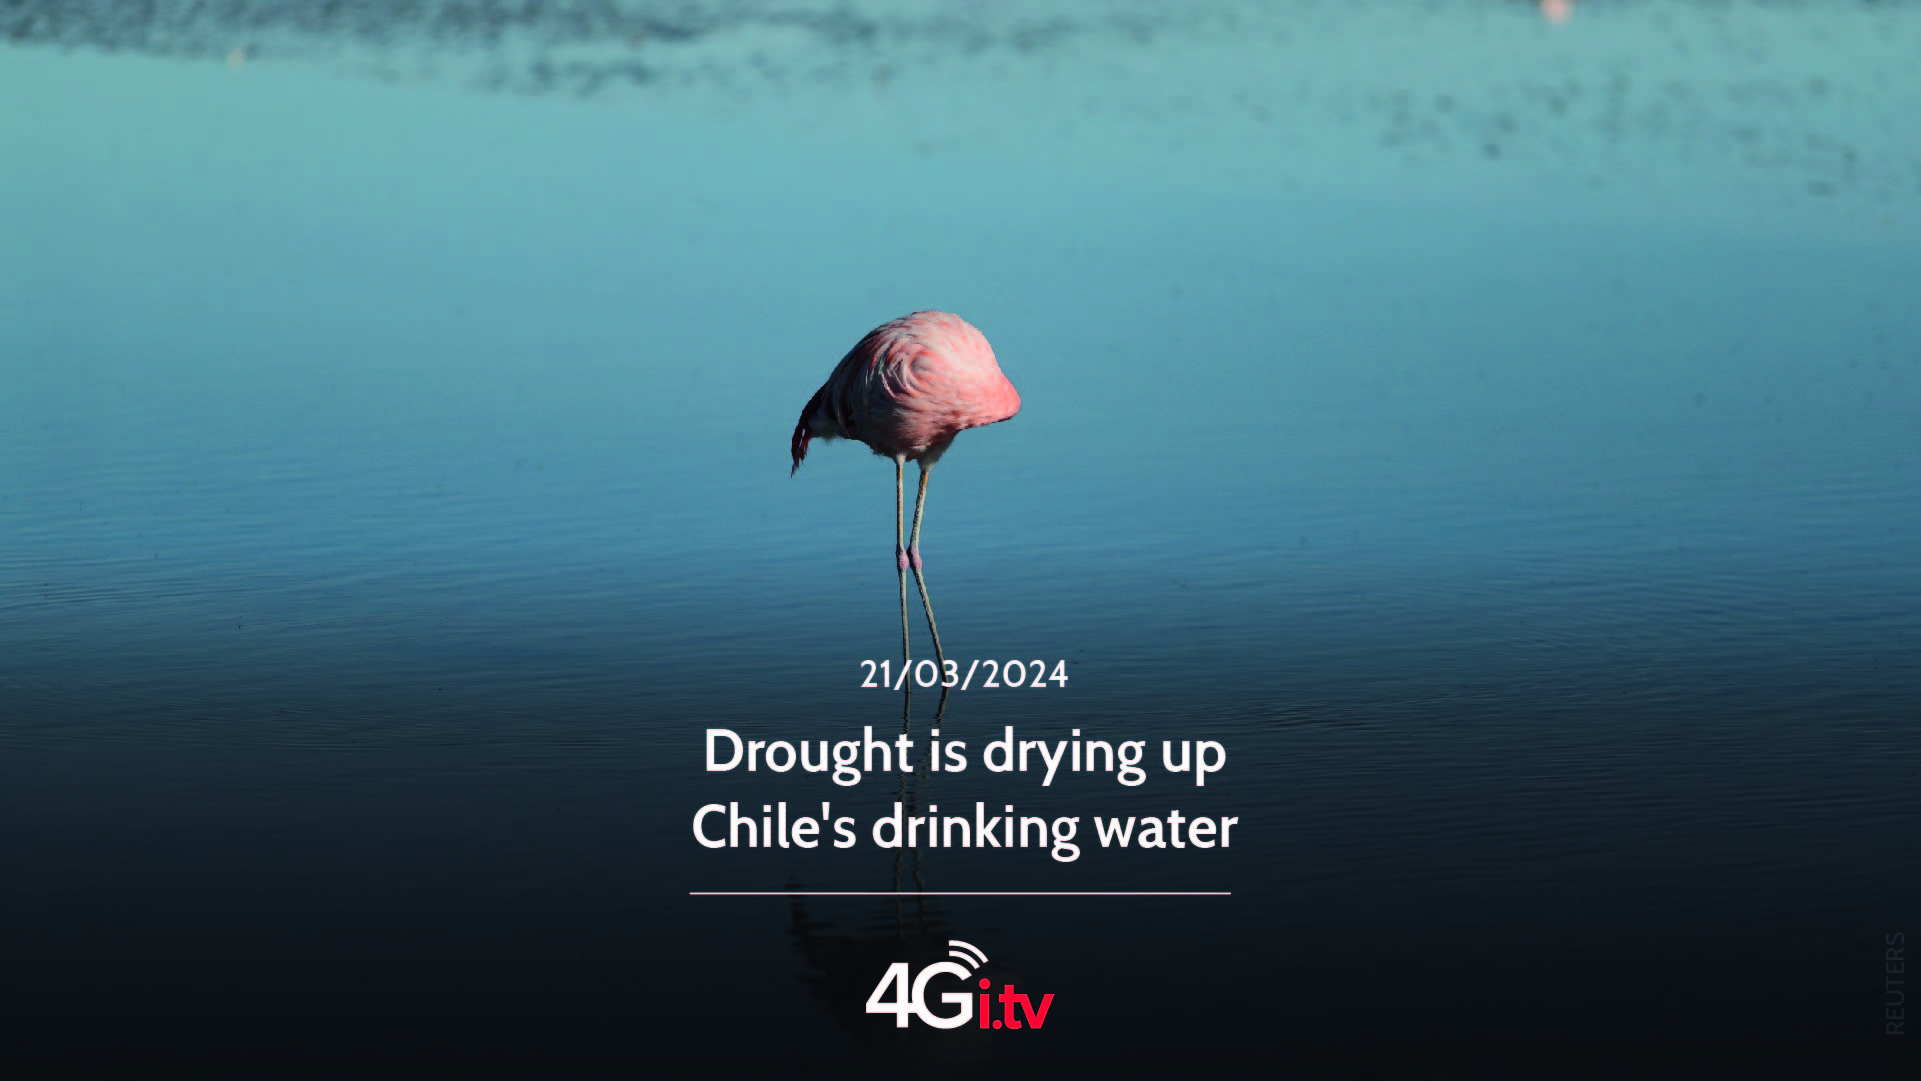 Подробнее о статье Drought is drying up Chile’s drinking water